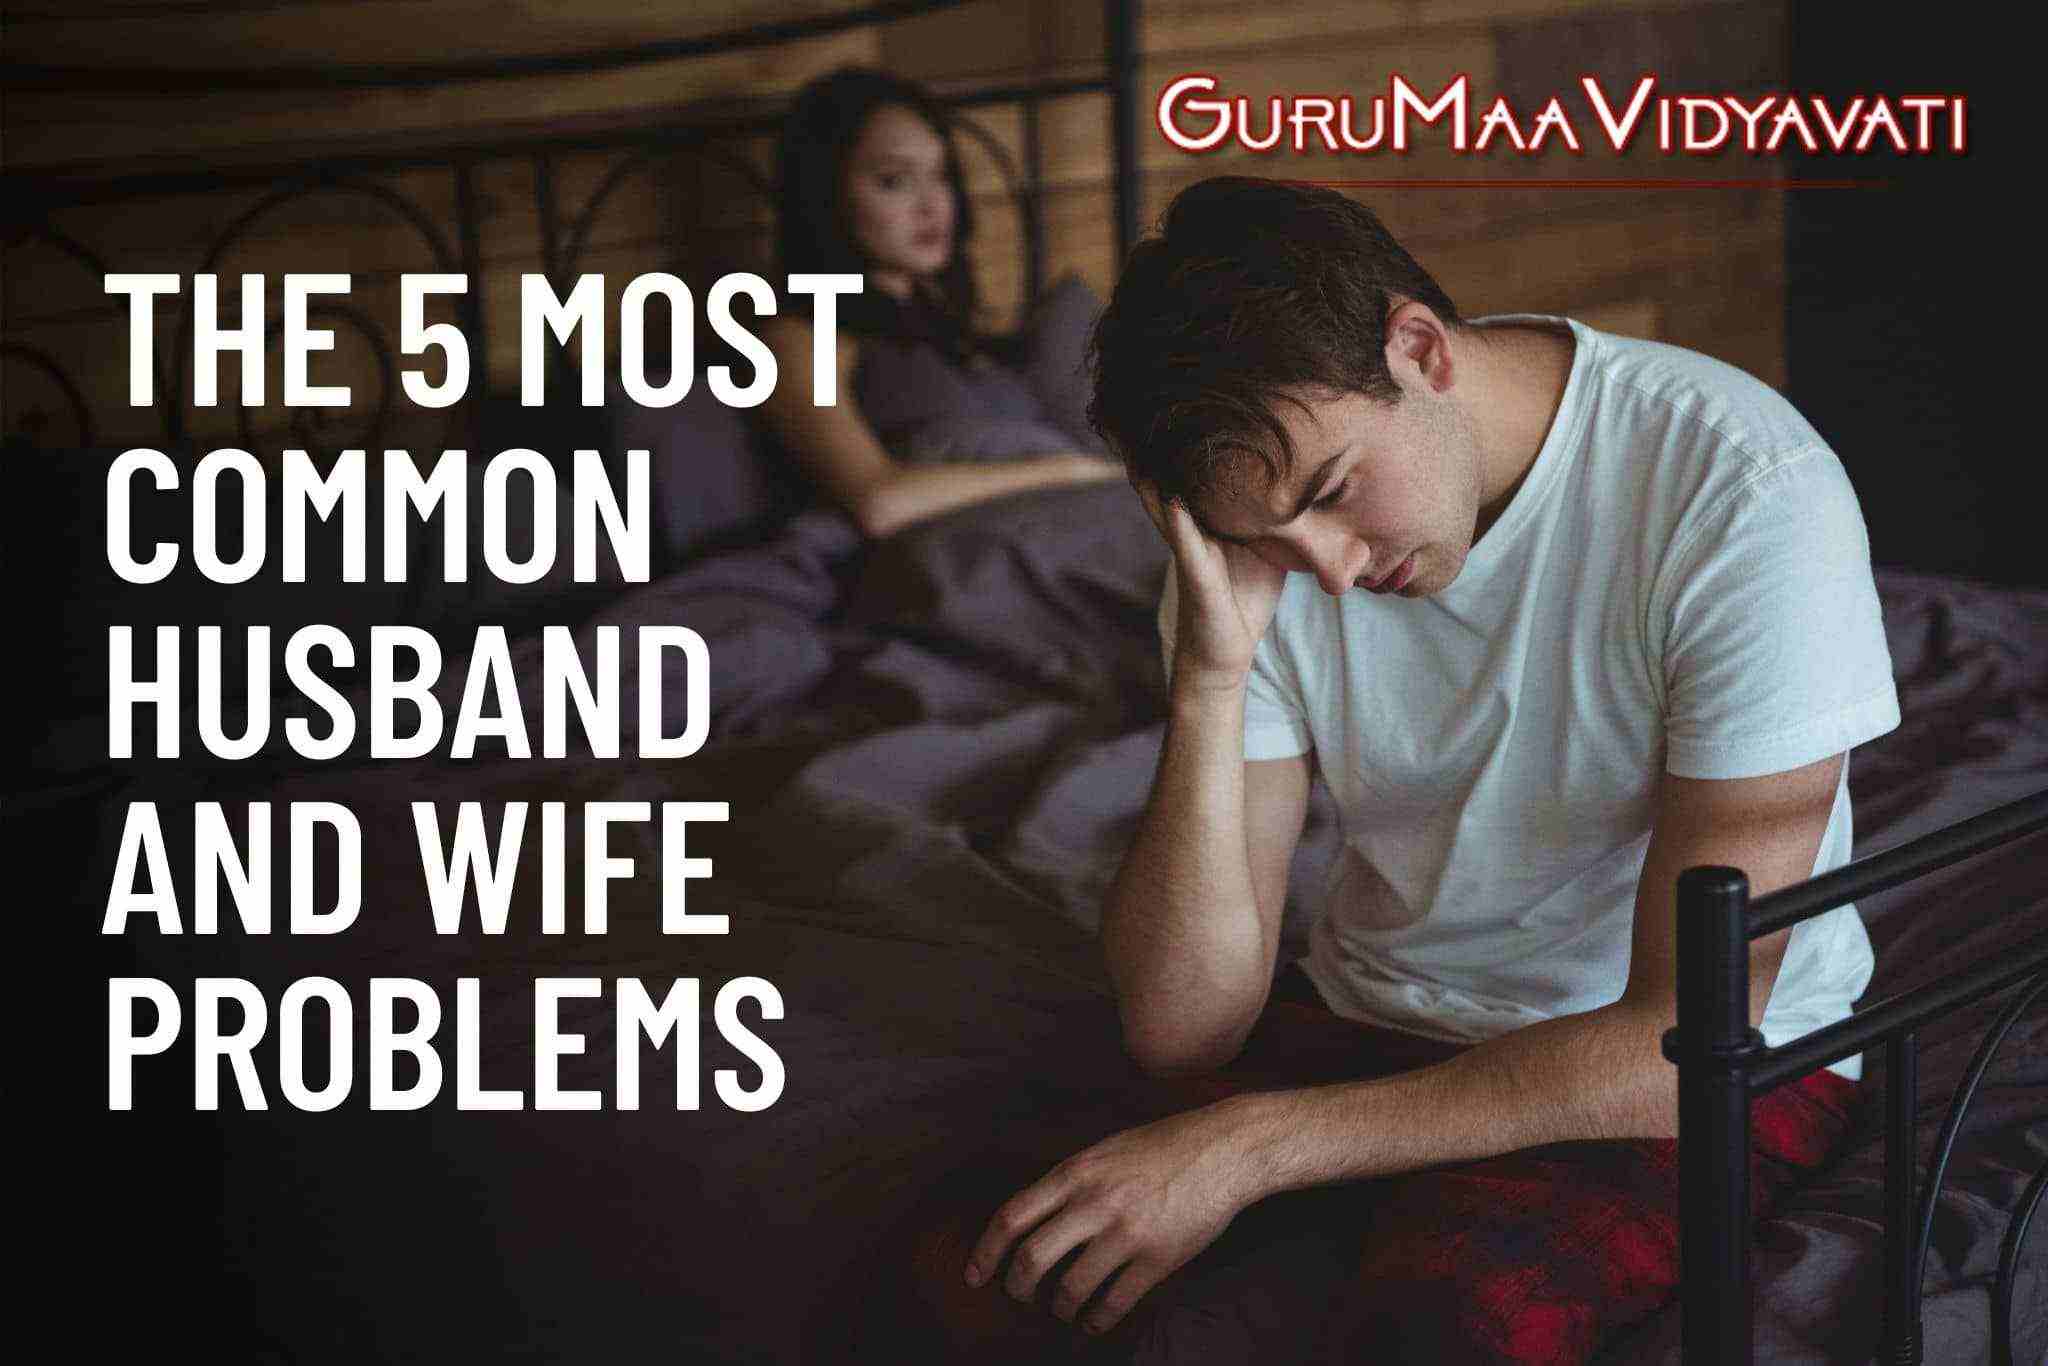 The 5 Most Common Husband and Wife Problems